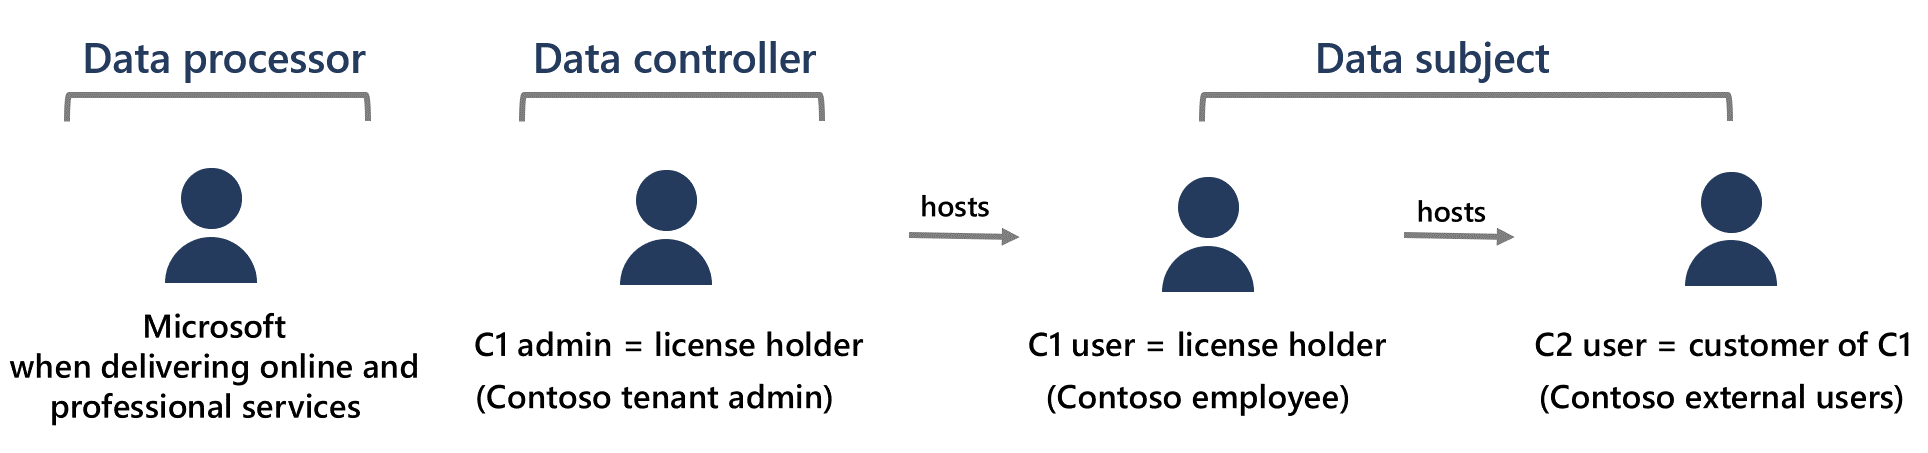 Data processor is microsoft when delivering online and professional services. Data controller is C1 admin (license holder). An example would be Contoso tenant admin. Both C1 user and C2 user can be data subject. An example of C1 user is contoso employee, and an example of C2 user would be contoso external users.